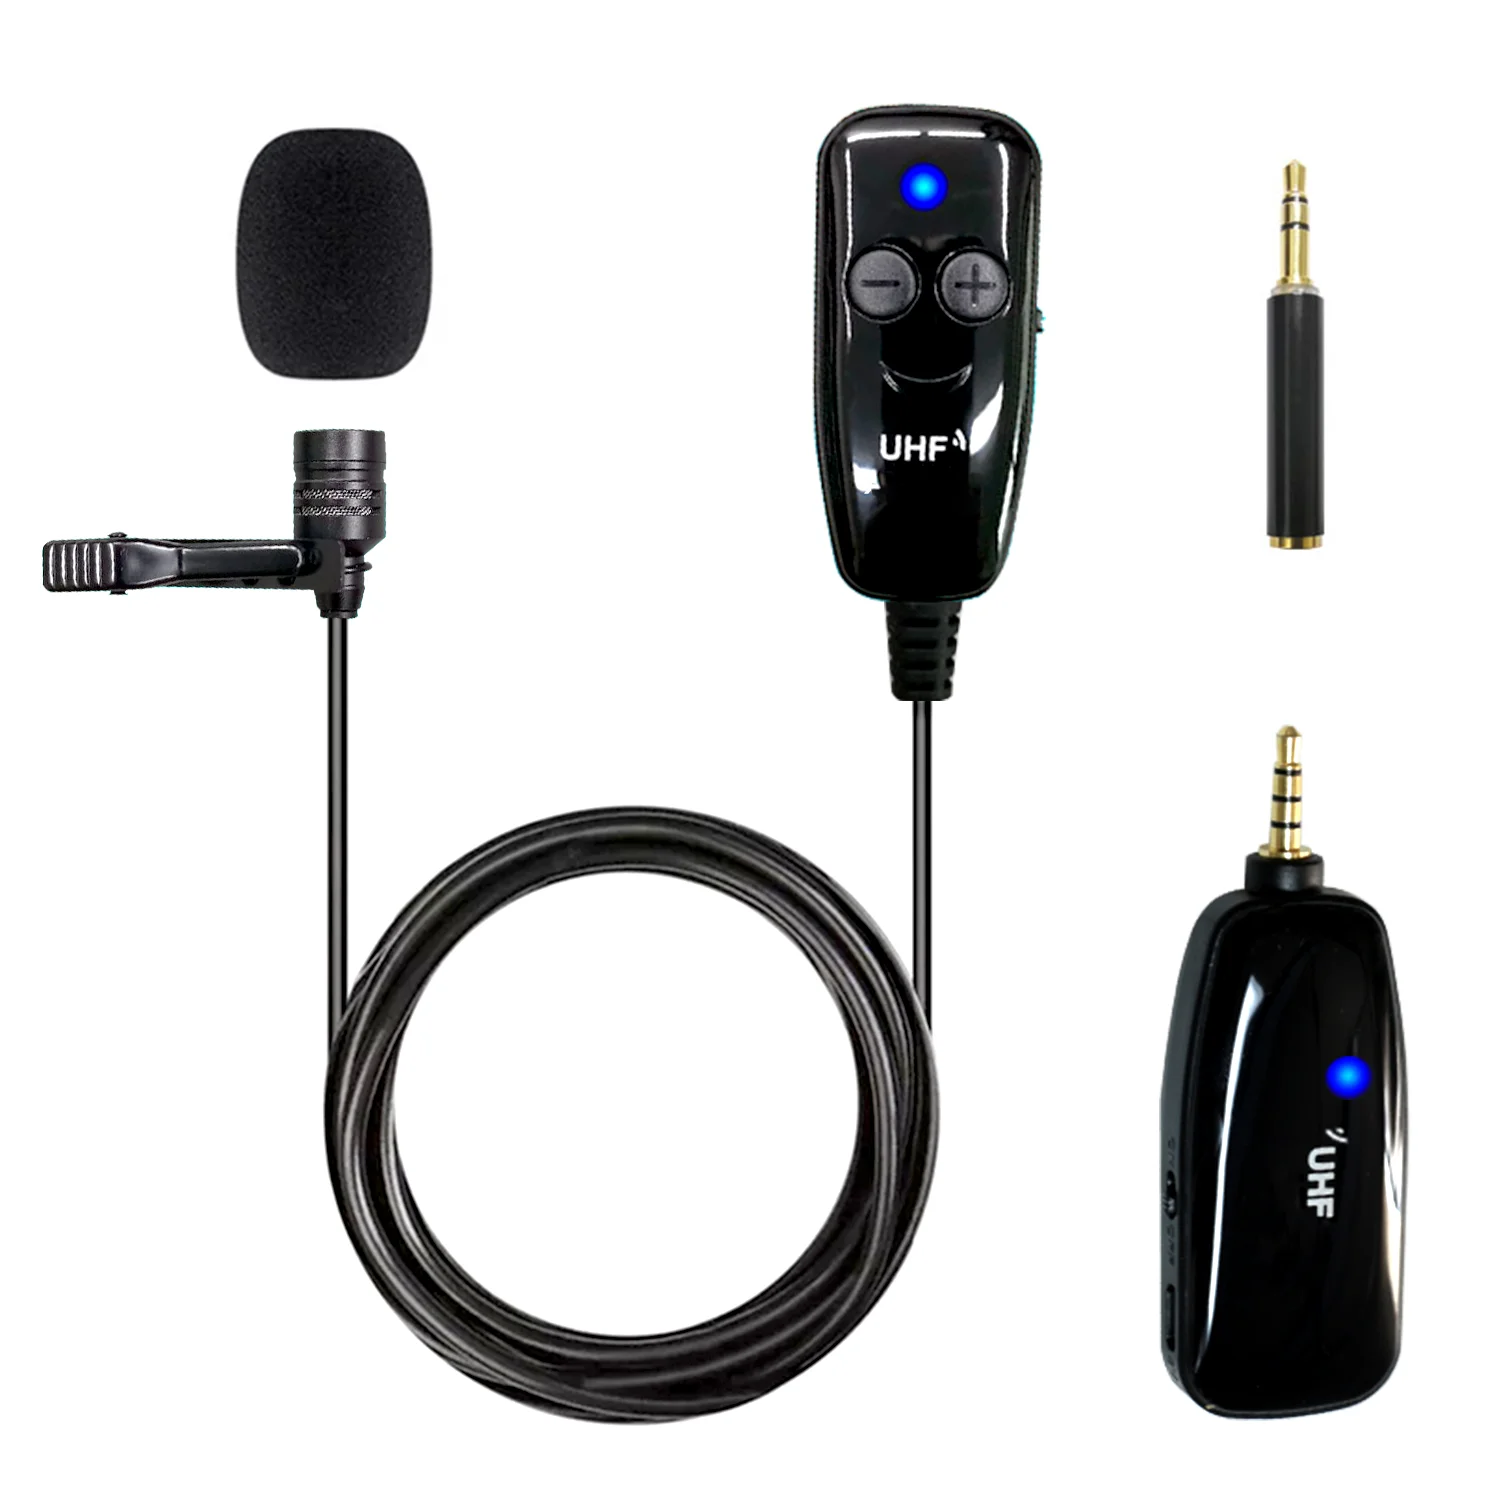 

UHF Lavalier Lapel Wireless Microphone Recording Vlog Youtube Live Interview for iPhone iPad PC Android DSLR microphone